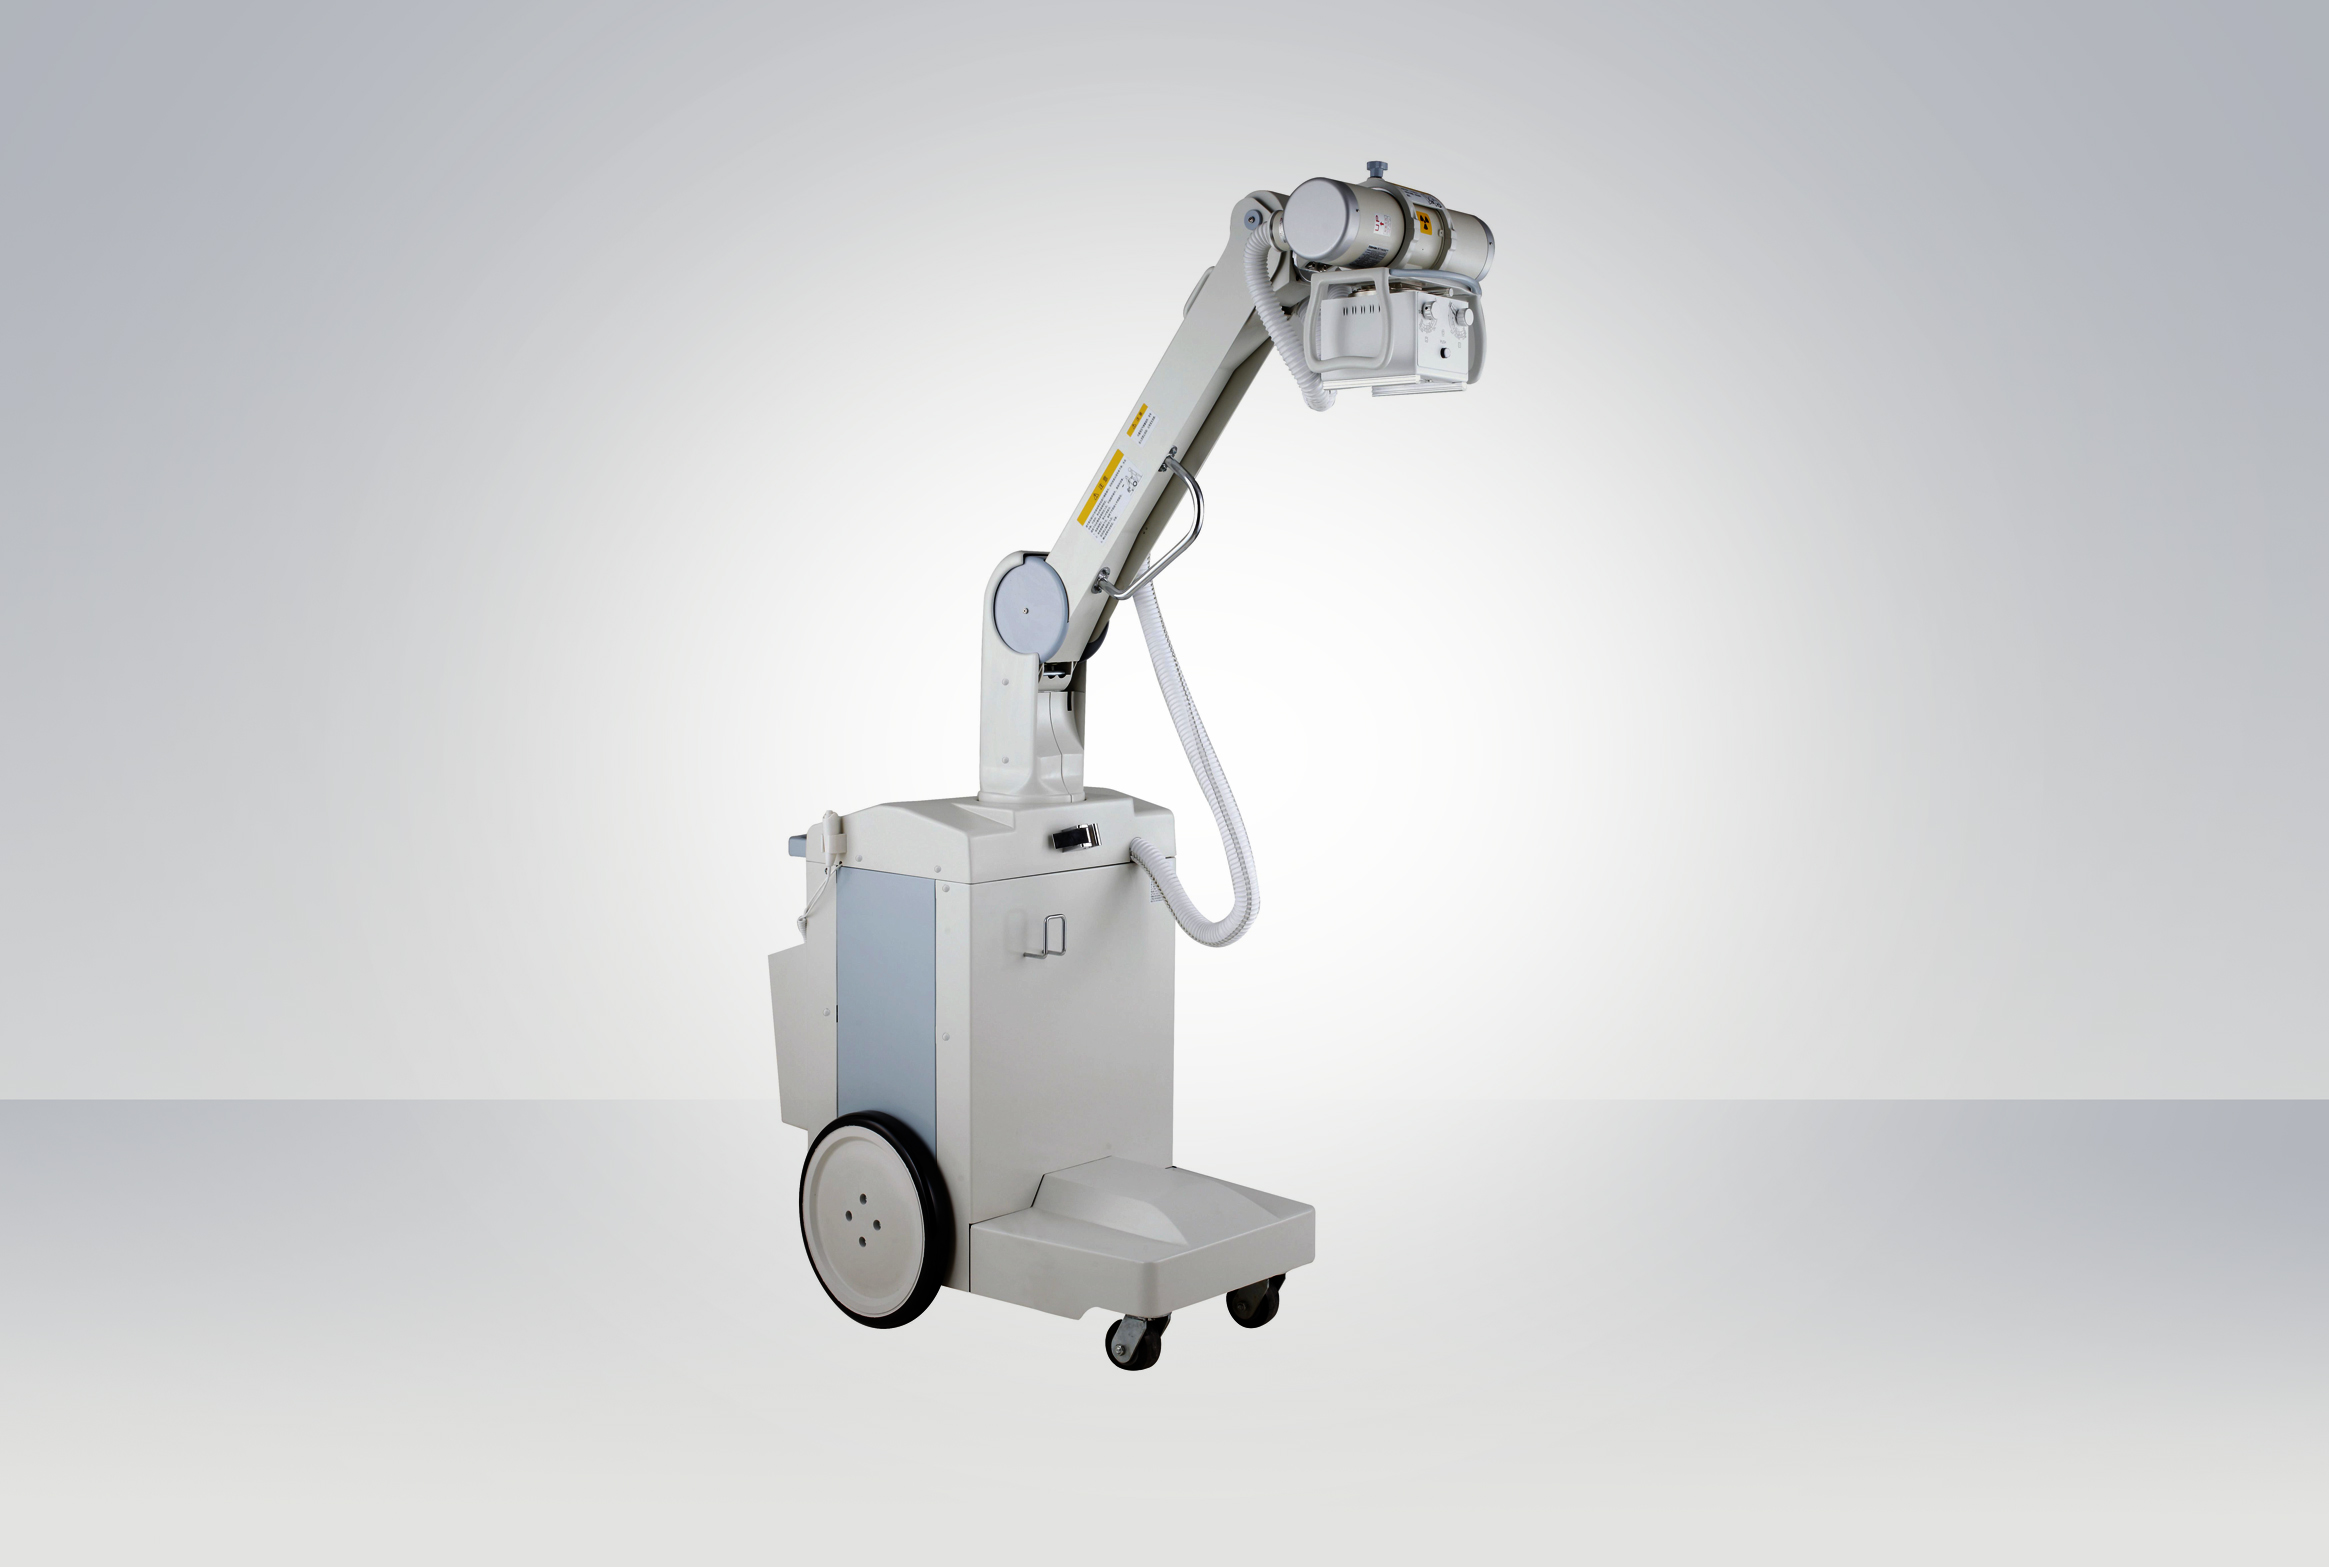 Mobile Medical Radiographic X-Ray Machine